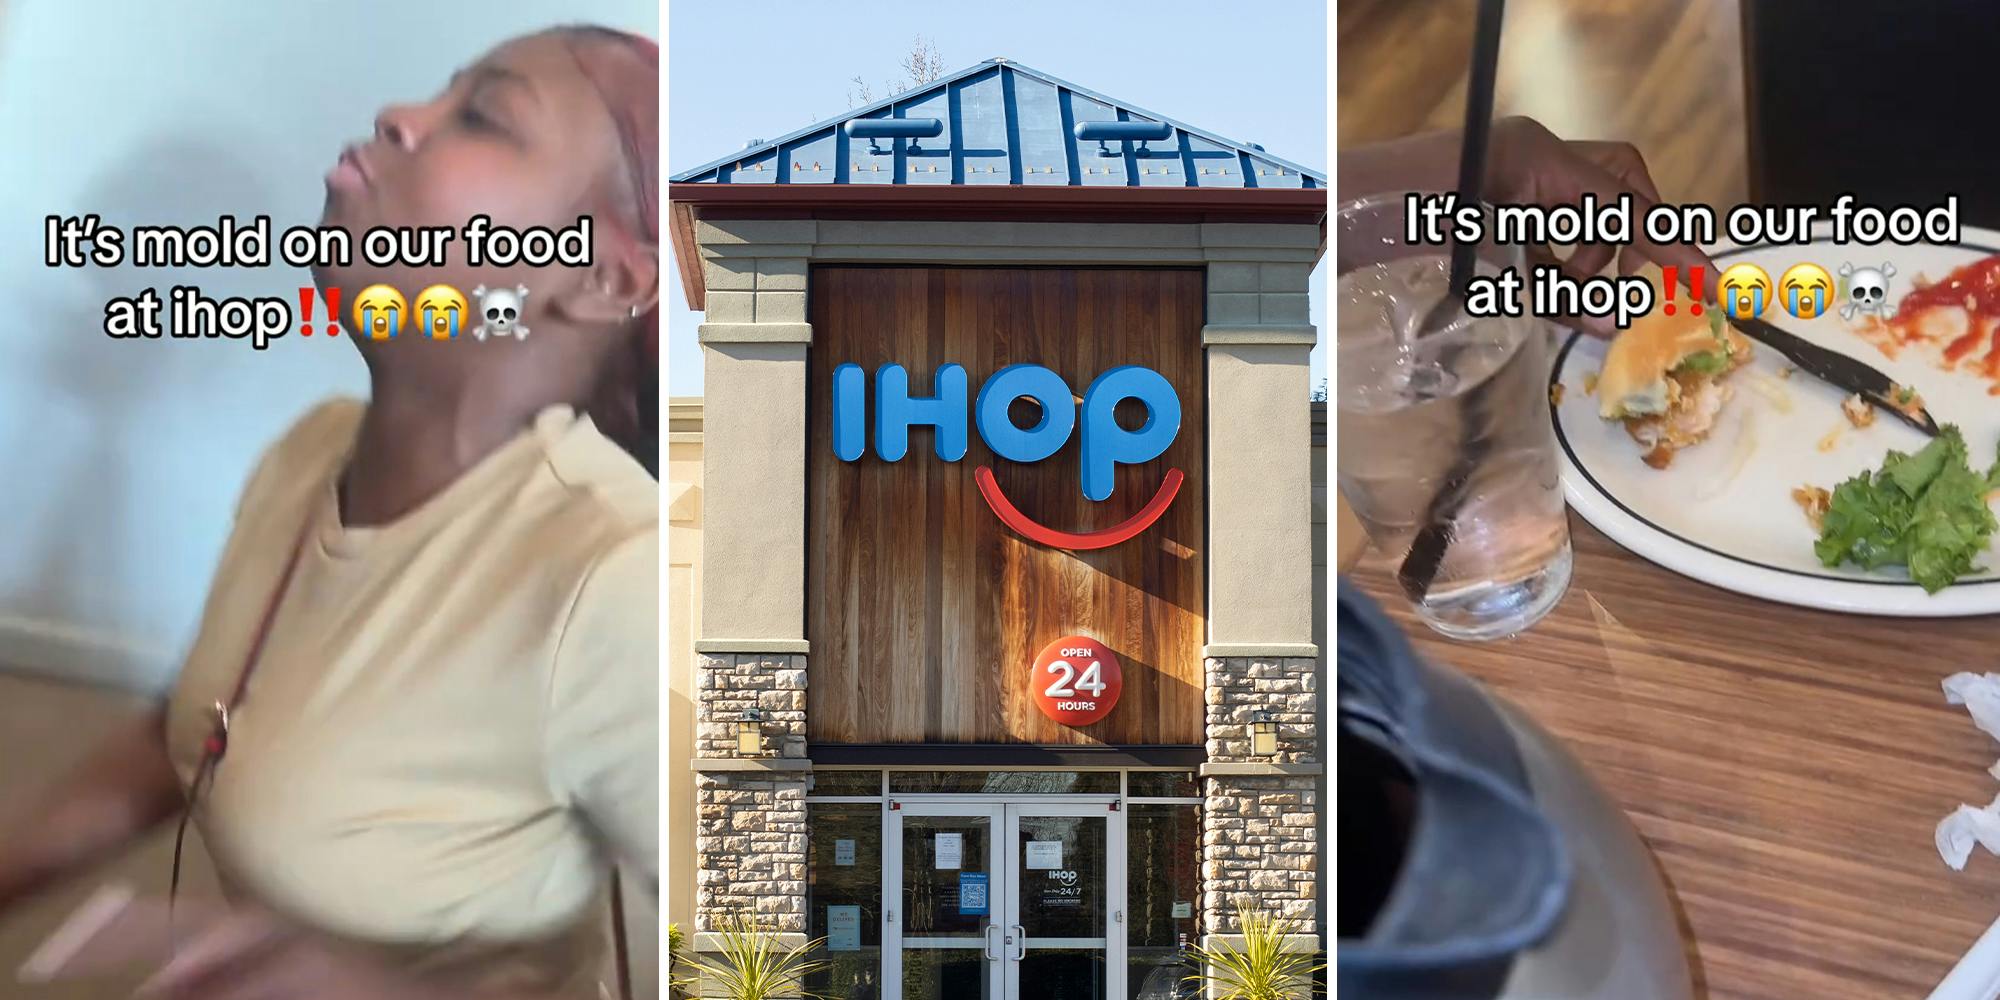 ‘This is why I examine my food before I eat it and between bites’: Customer finds something unusual in her food from IHOP